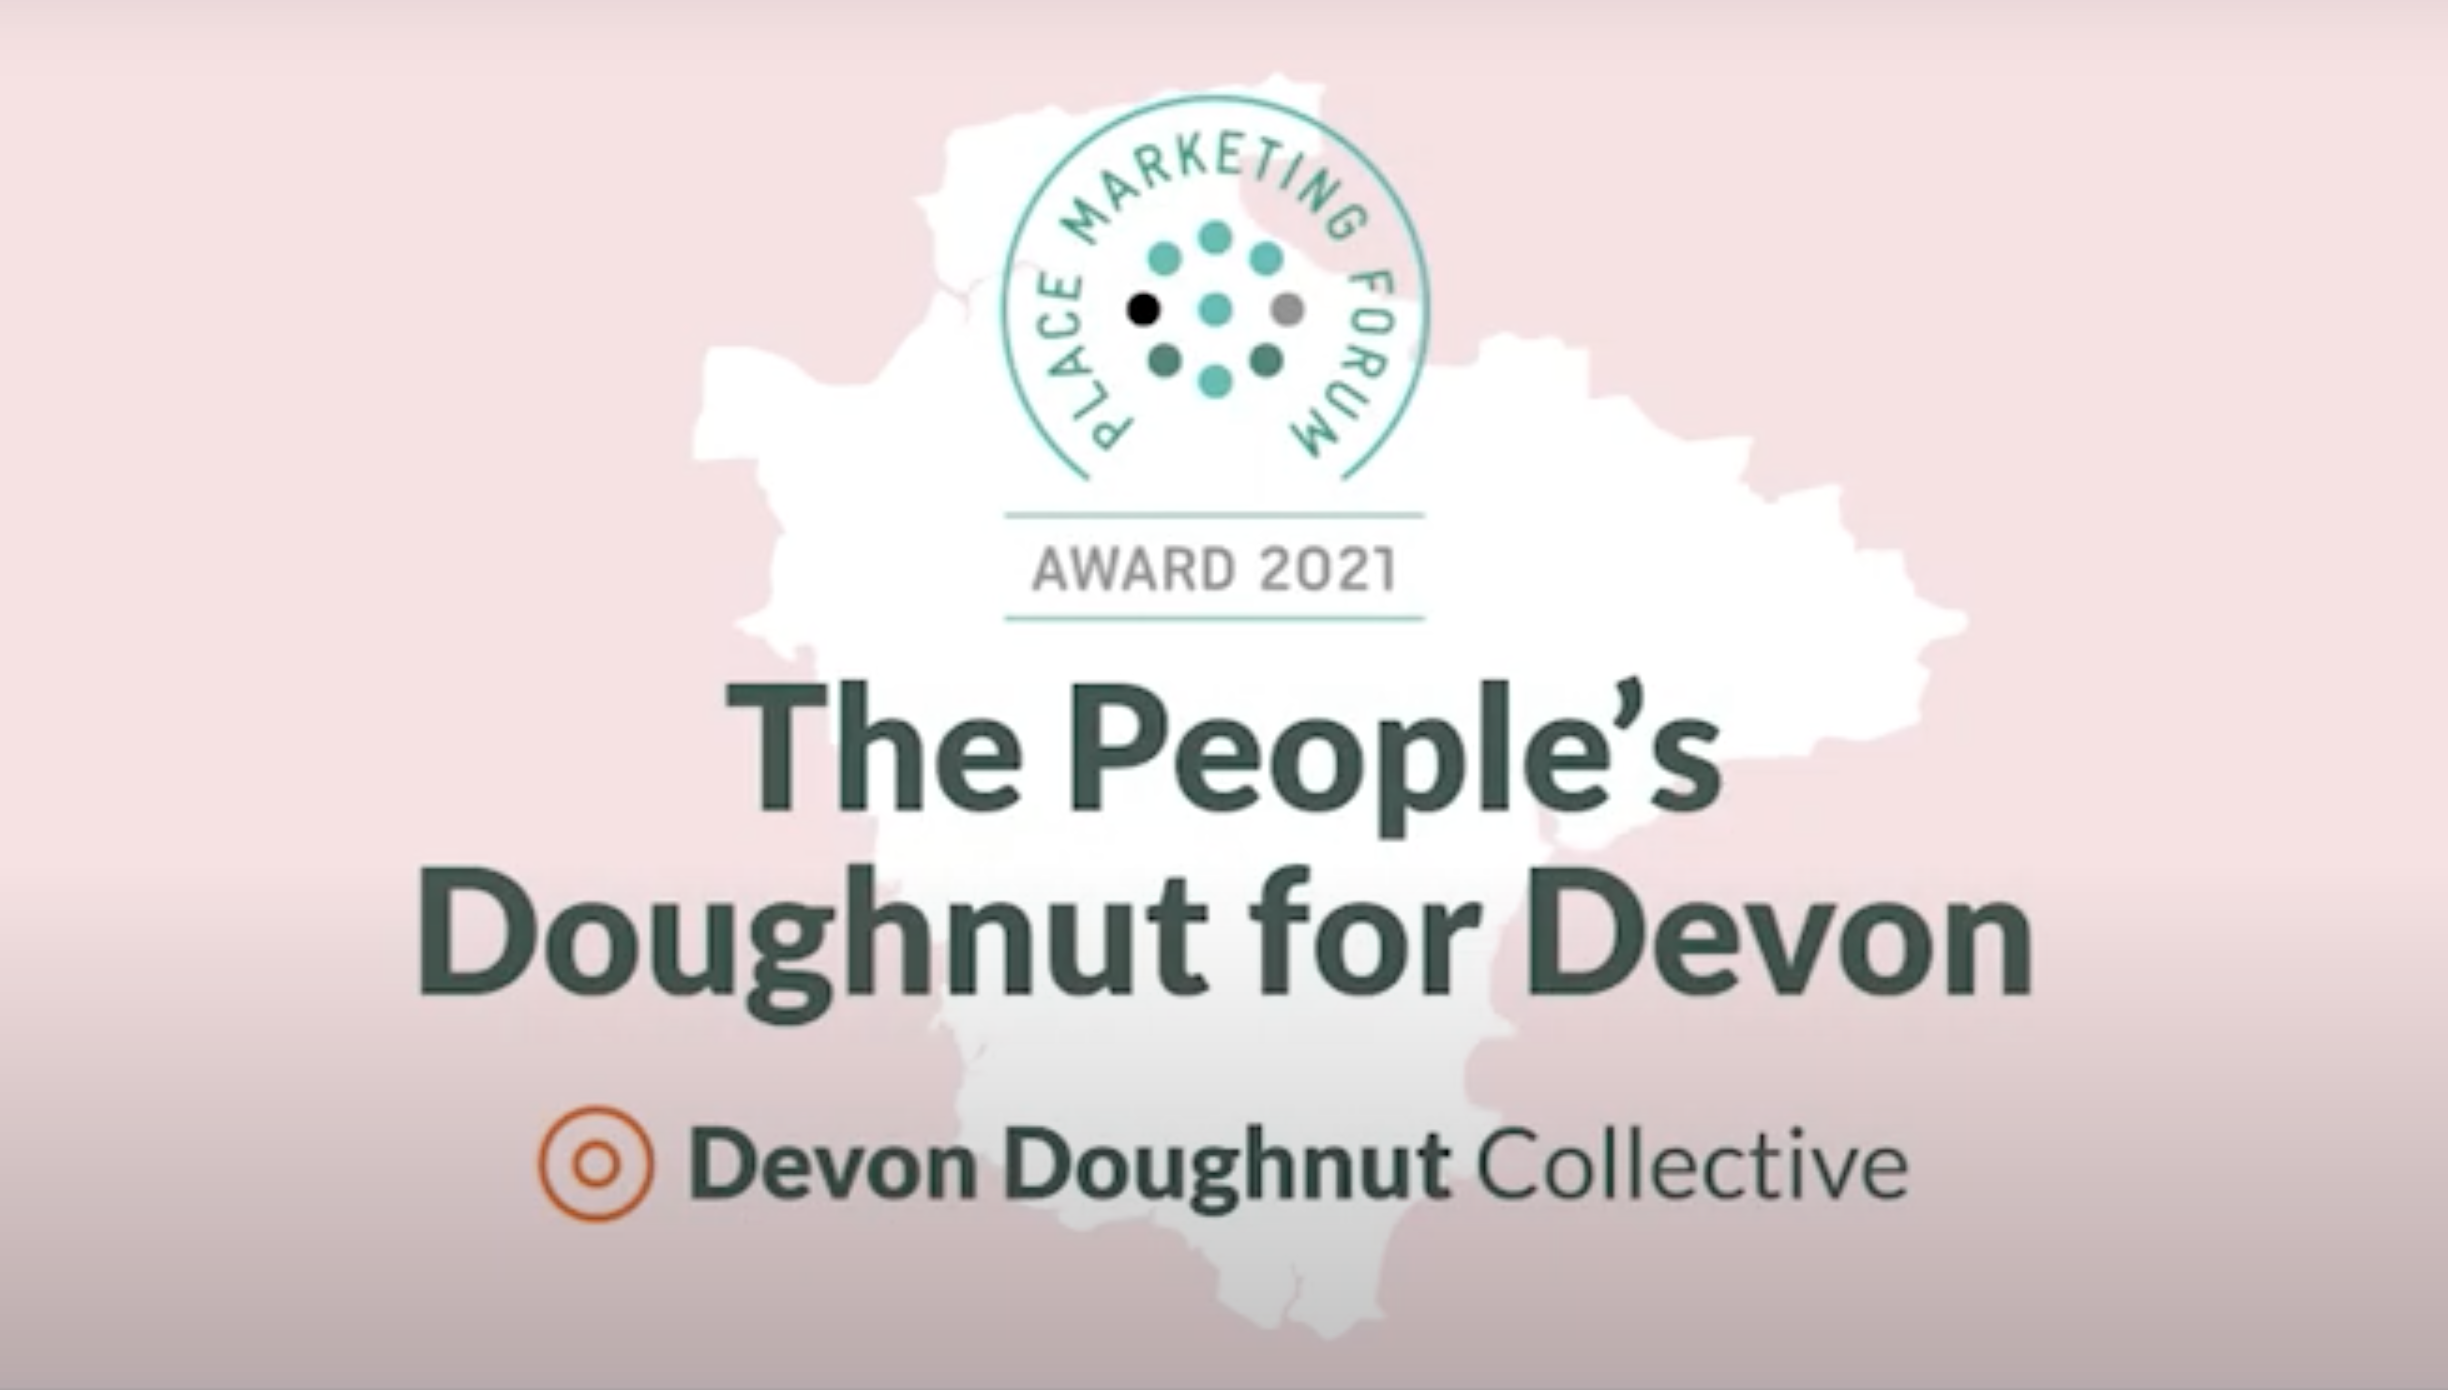 The Devon Doughnut Collective is a group of over 140 changemakers putting the ideas of Doughnut Economics into practice in Devon in the UK. Their work was recognised by the Place Marketing Forum, France. 